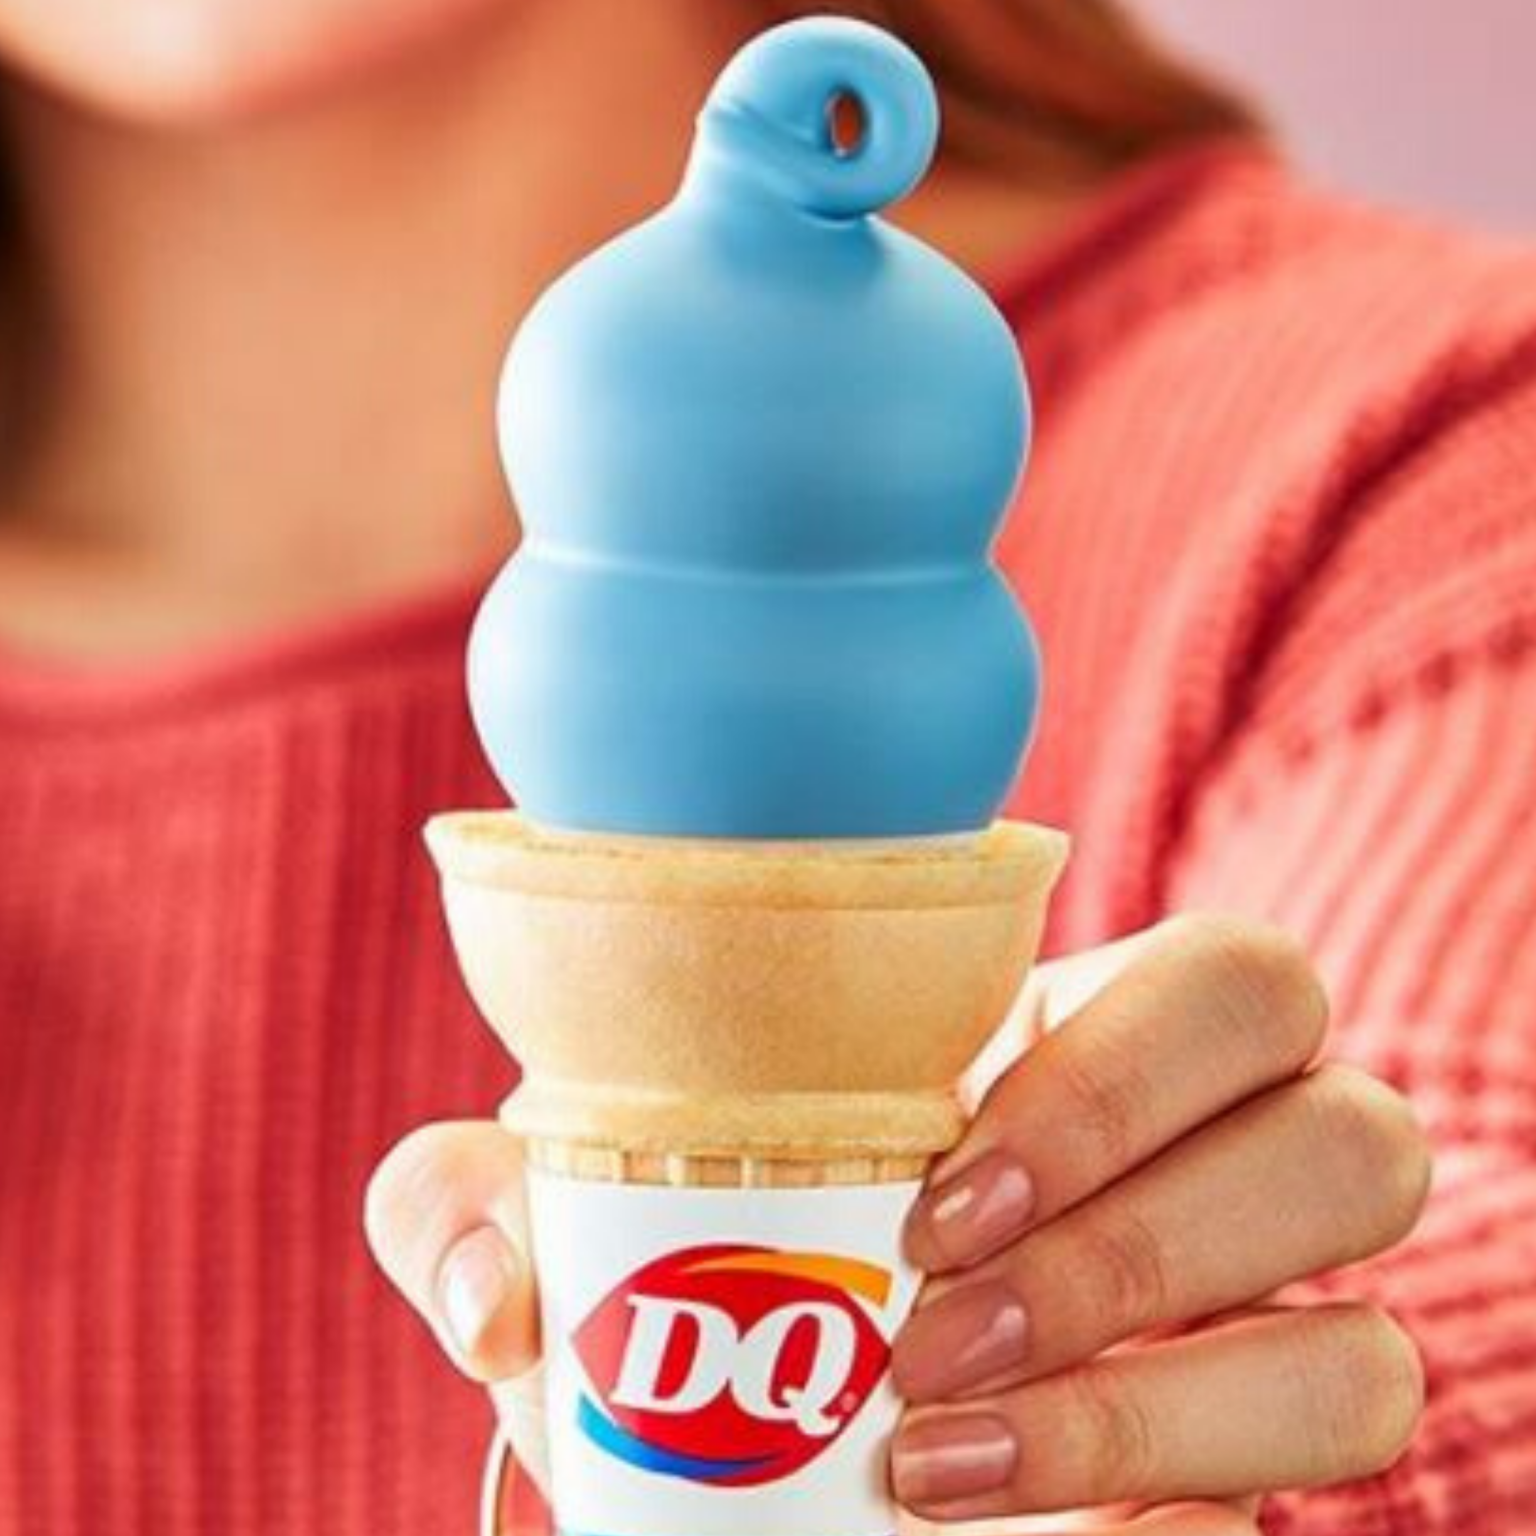 1 OFF DAIRY QUEEN DIPPED CONE ON 7.19.2020